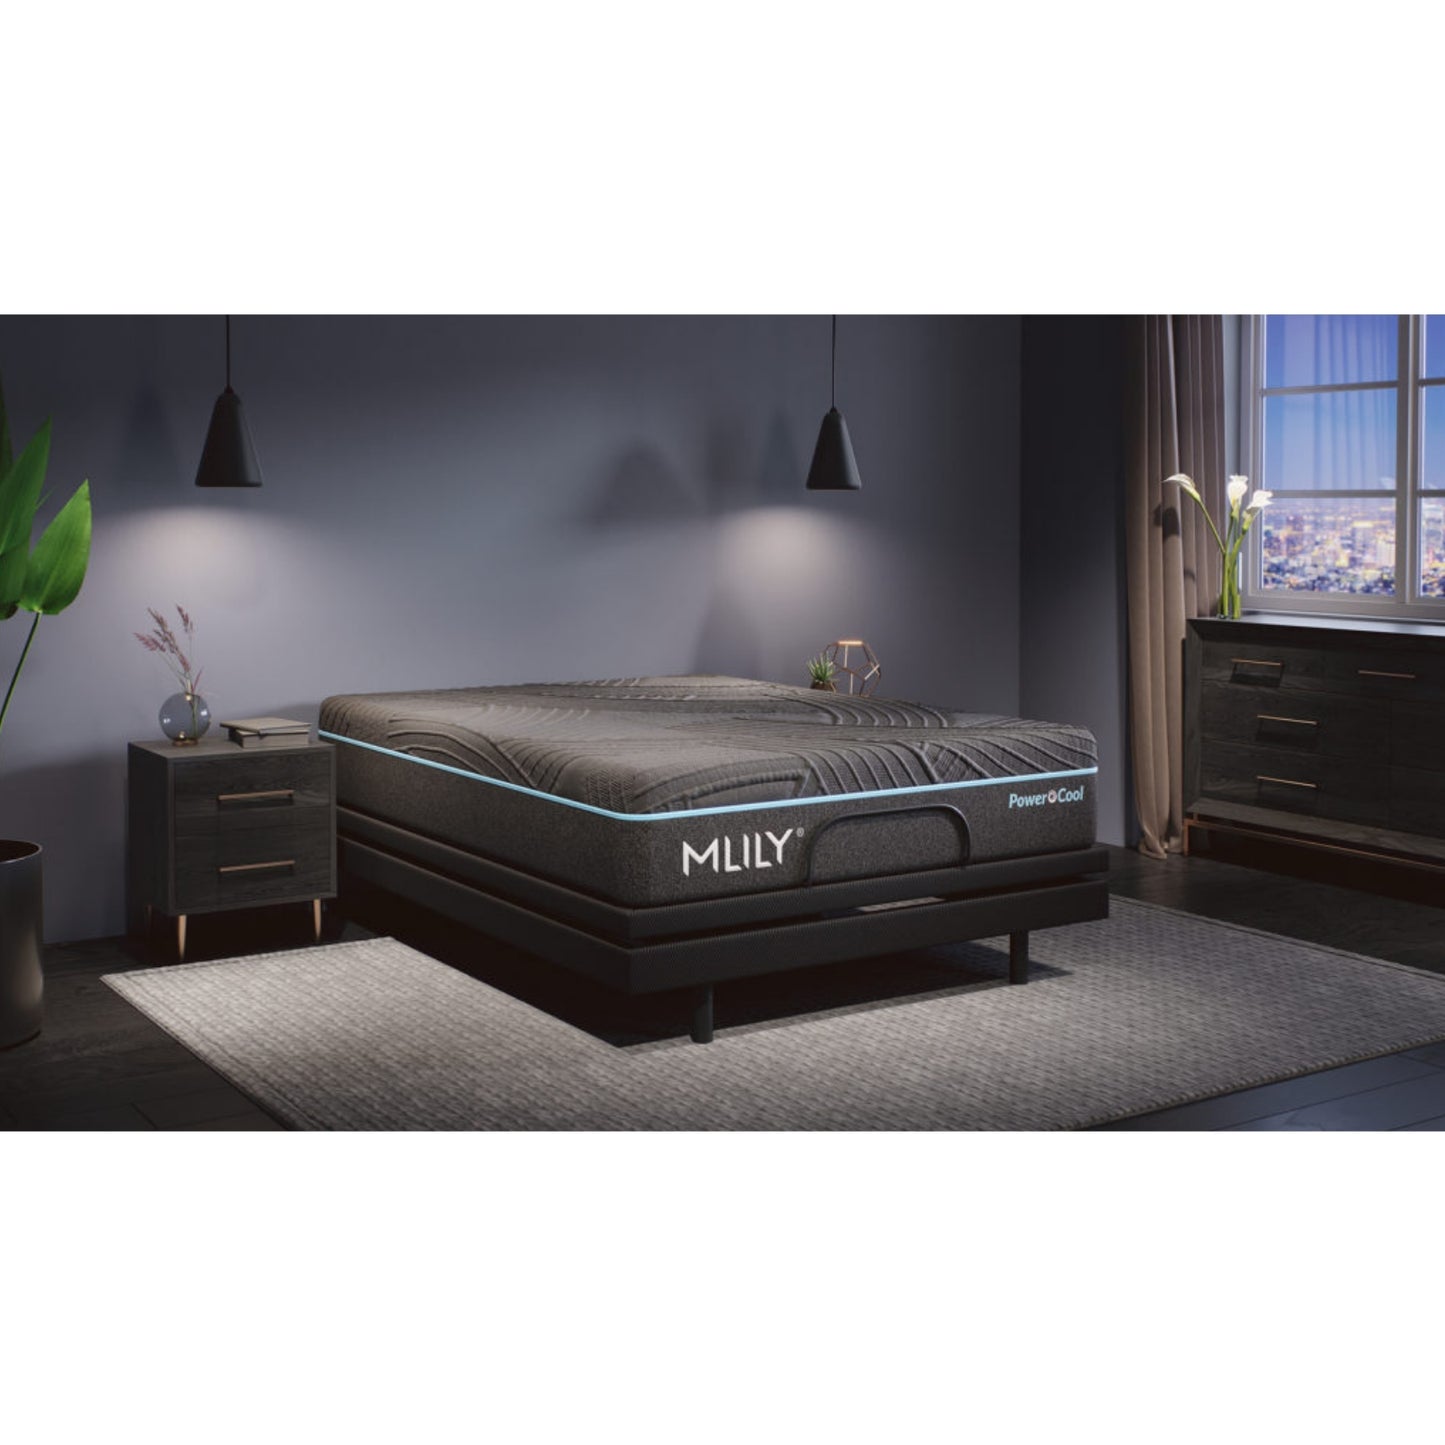 Firm PowerCool 11.5" Hybrid Mattress With Ventilated Memory Foam Pillow(s) And Adjustable Base Featuring Integrated Cooling Fans Inside Of A Bedroom, Flat Position, Corner View